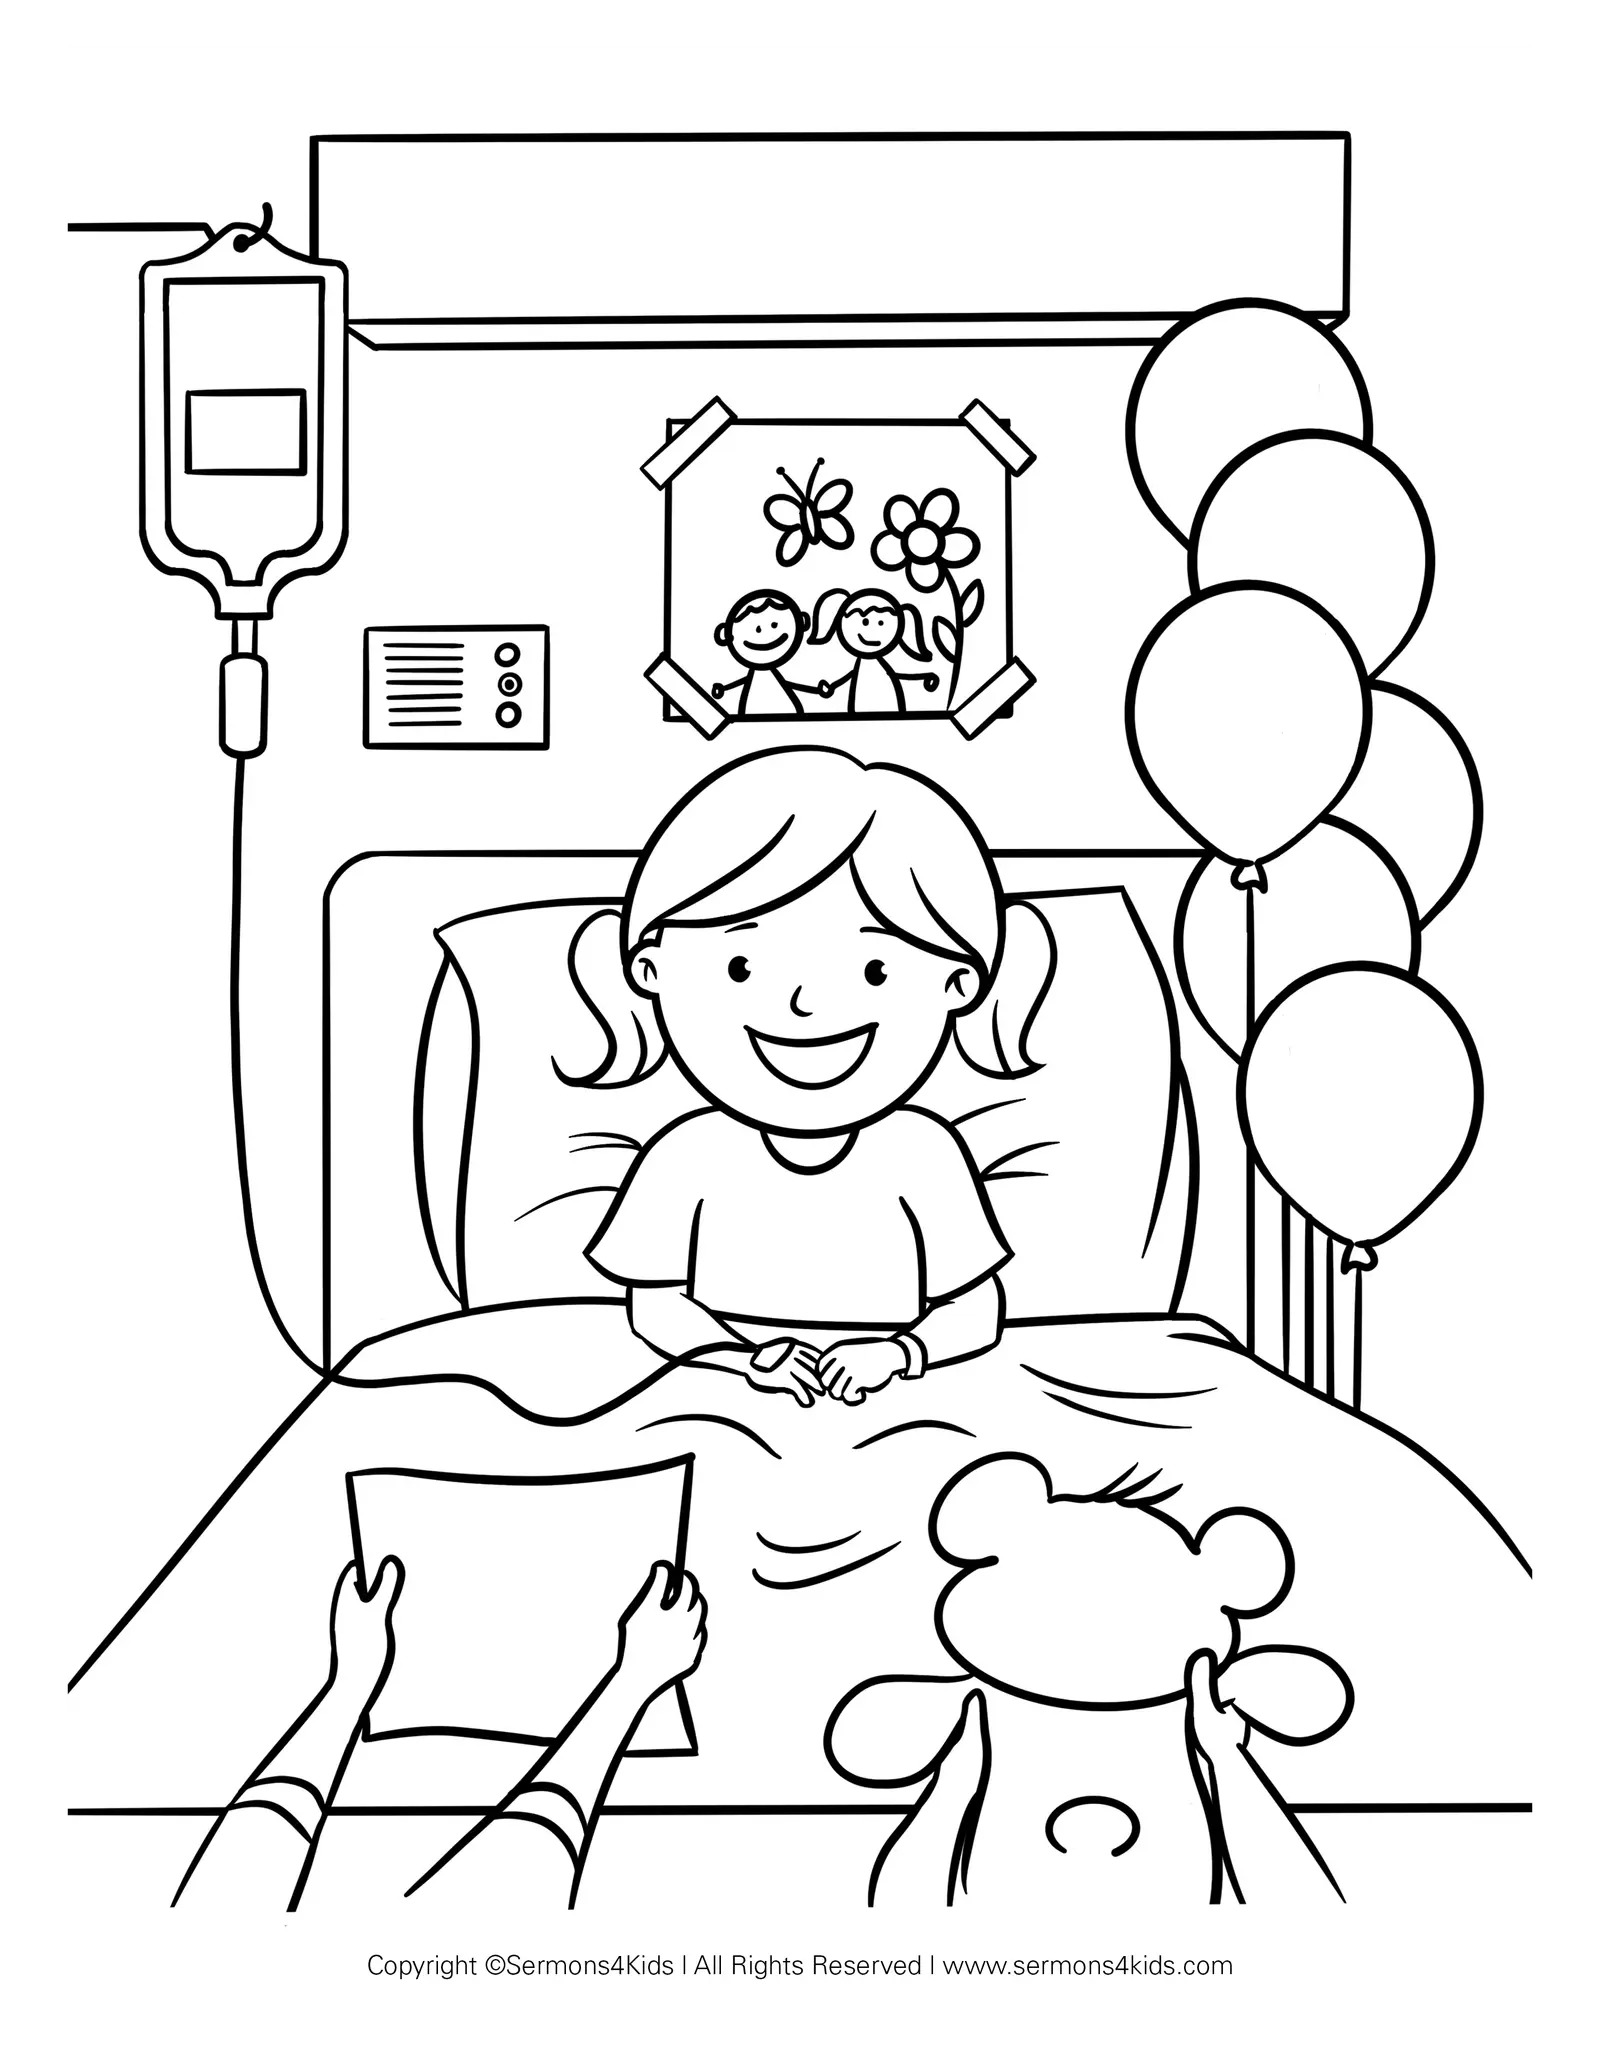 Sick In Bed Coloring Pages